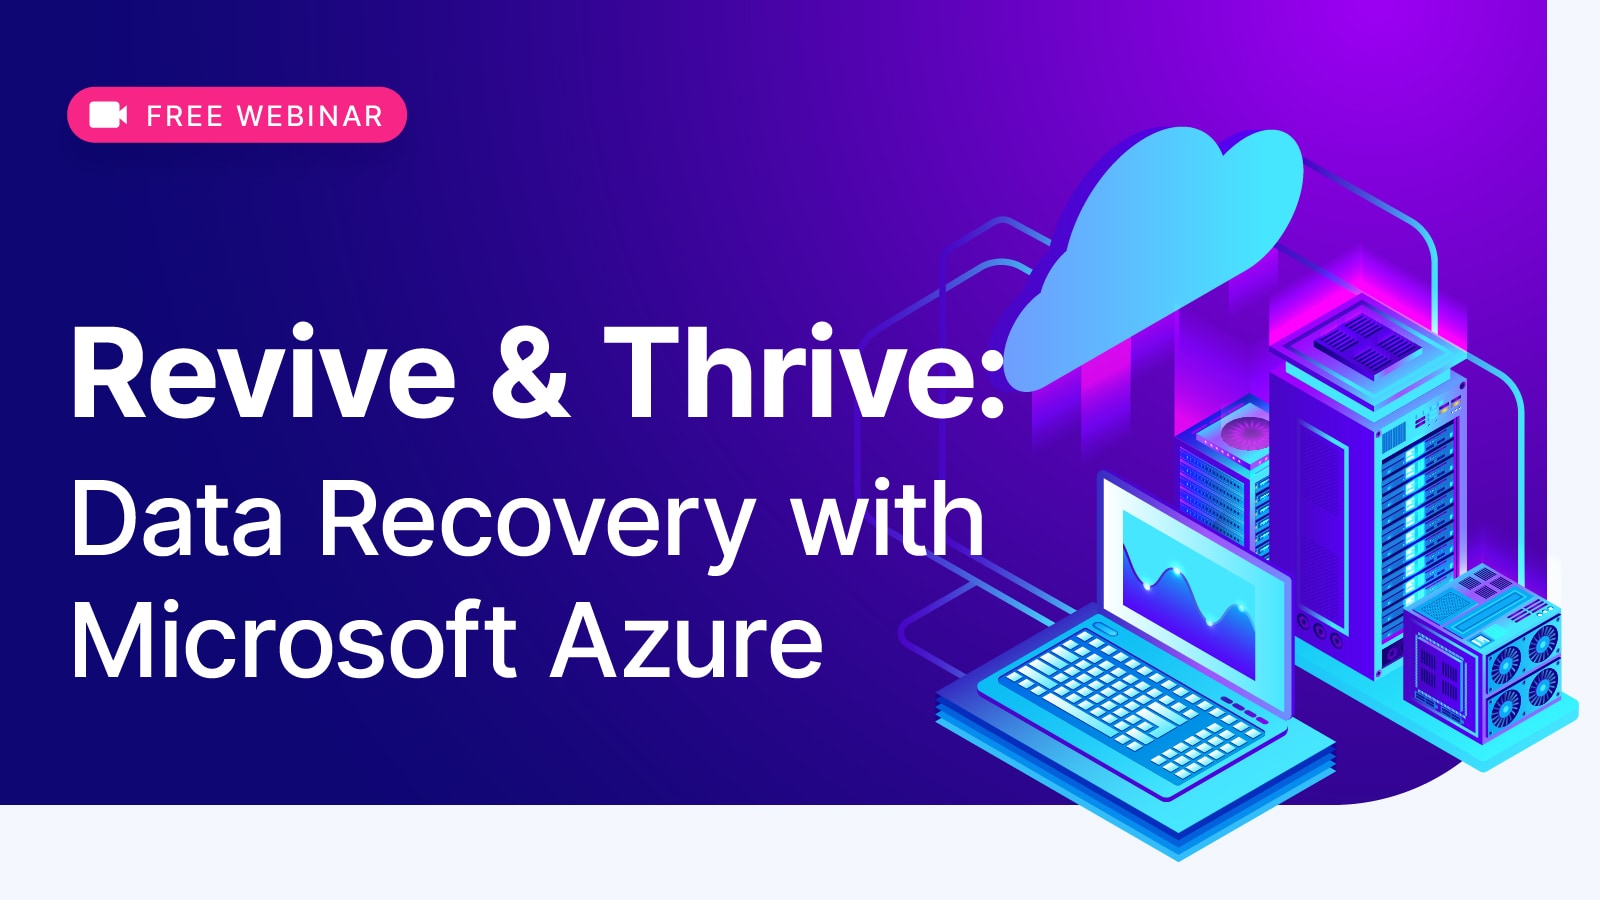 Revive & Thrive: Data Recovery with Microsoft Azure